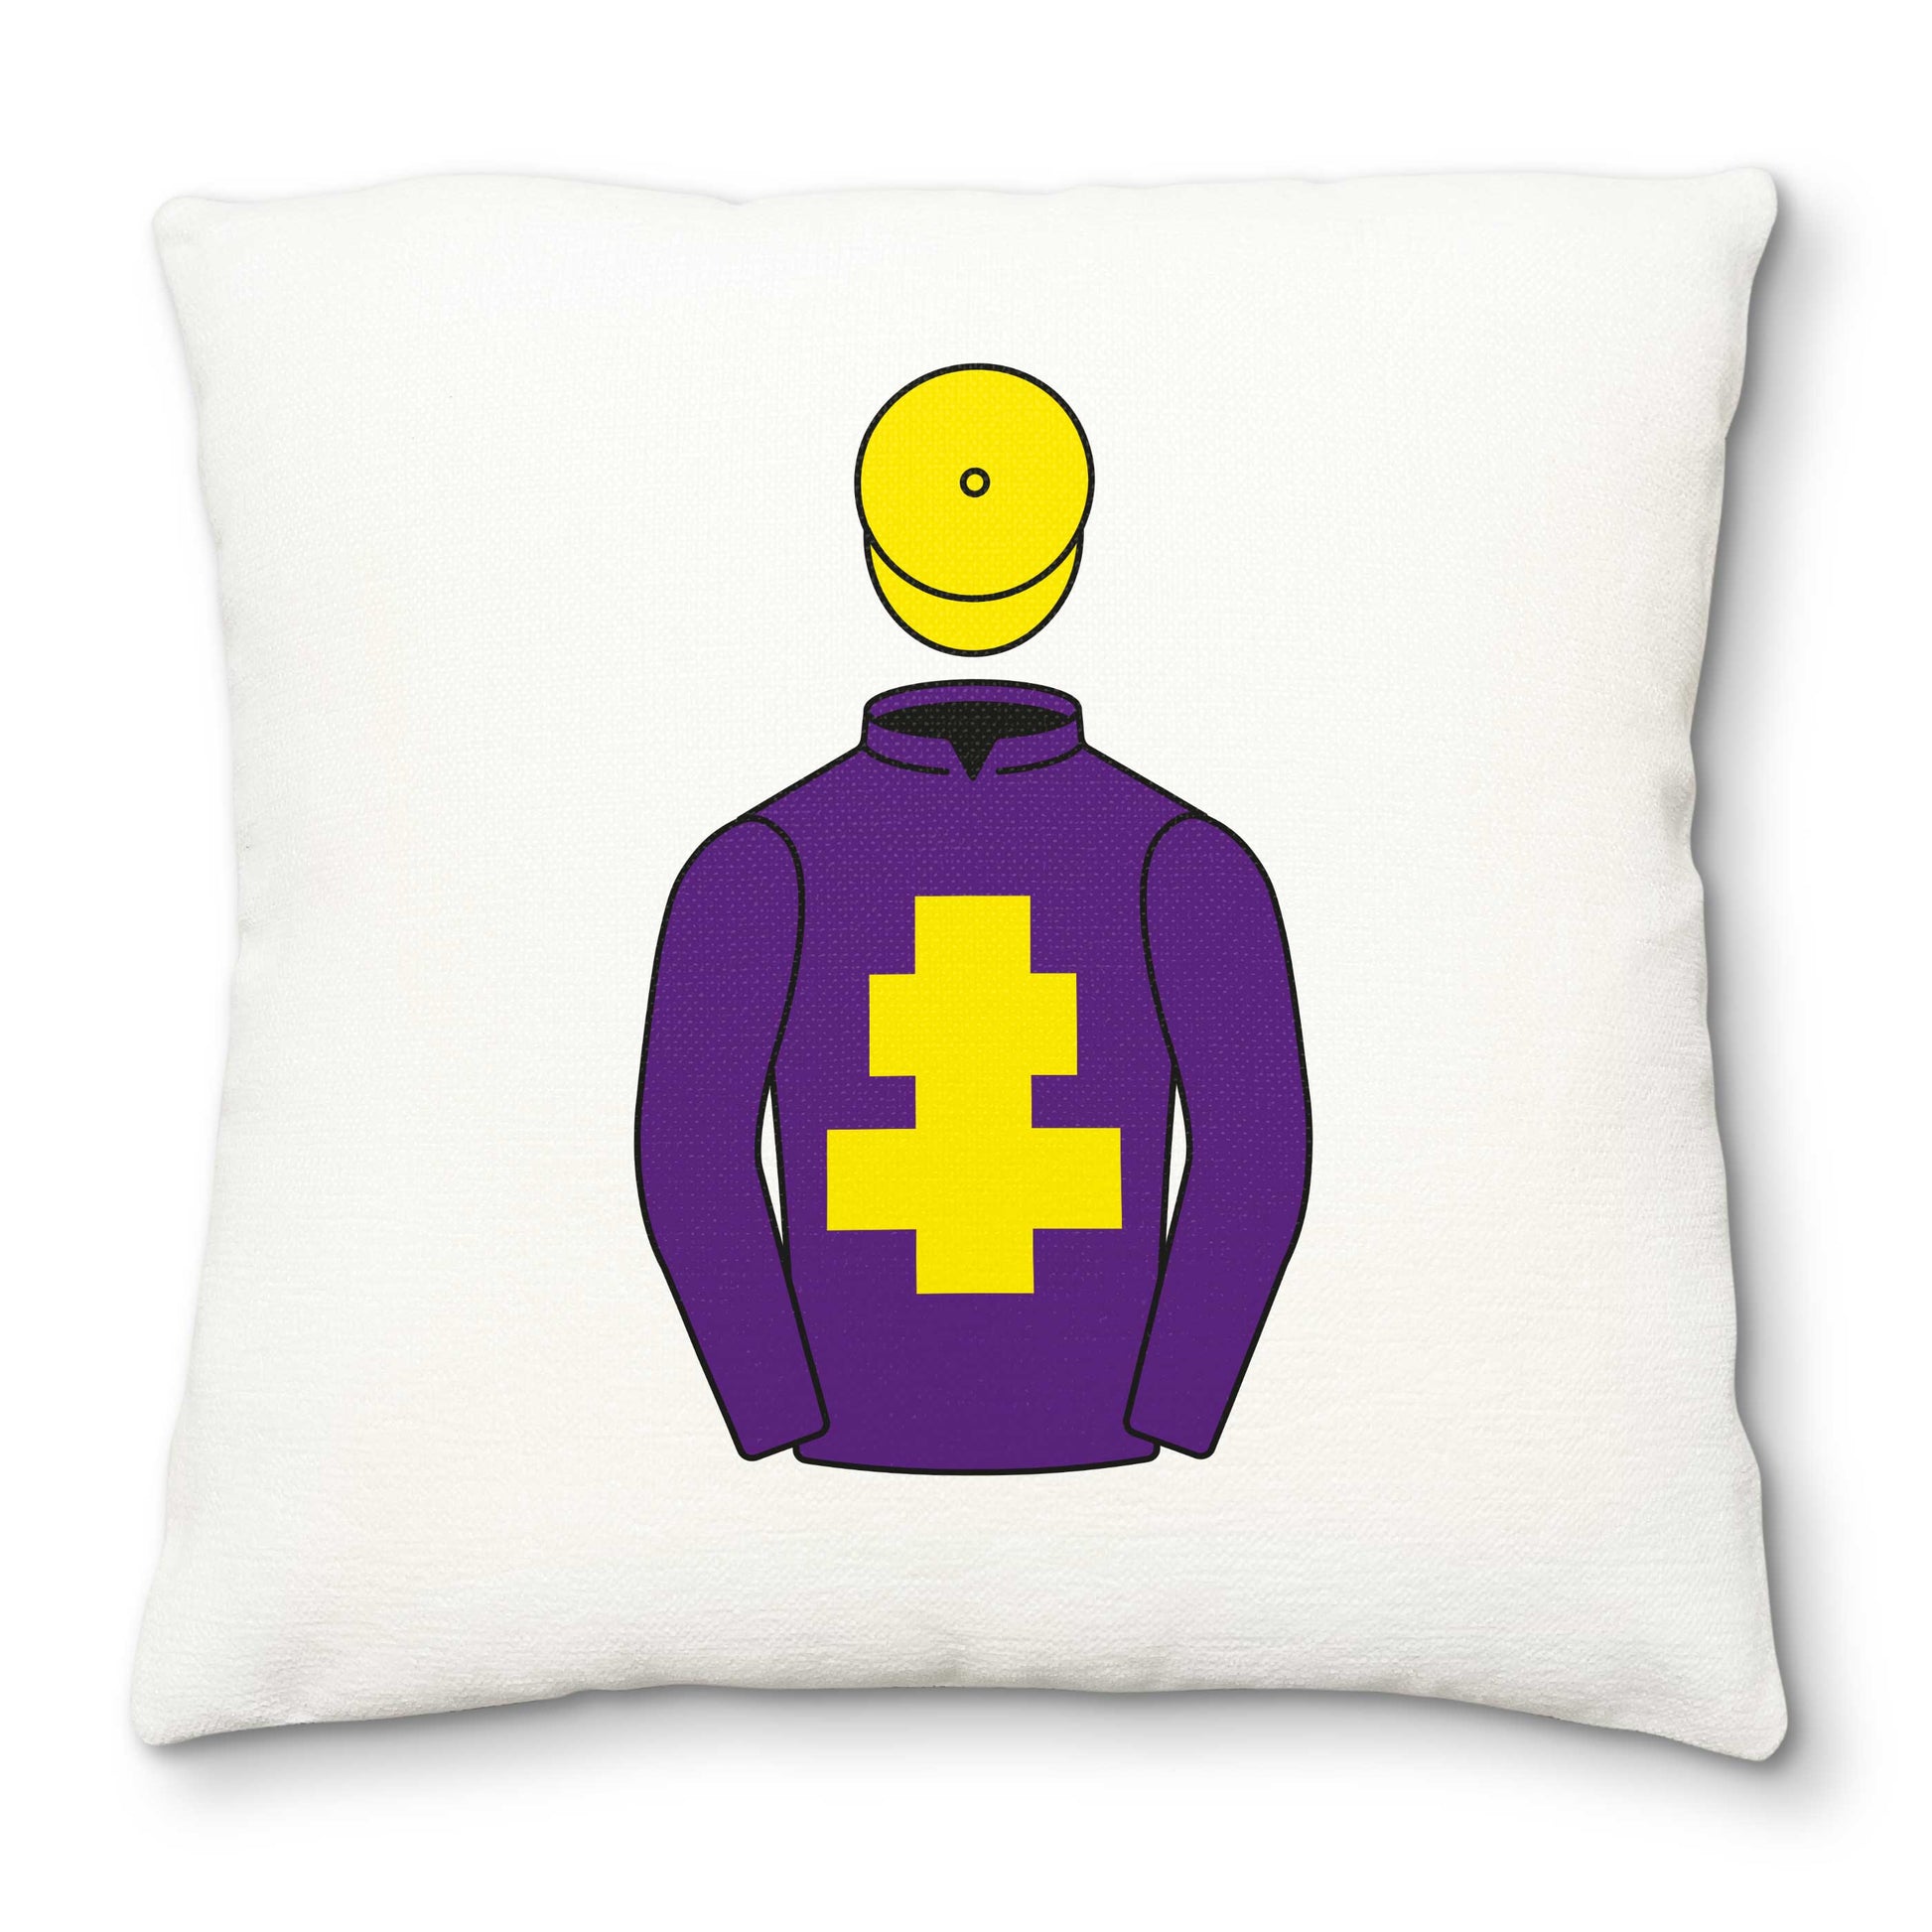 Dr R Lambe Deluxe Cushion Cover - Deluxe Cushion Cover - Hacked Up